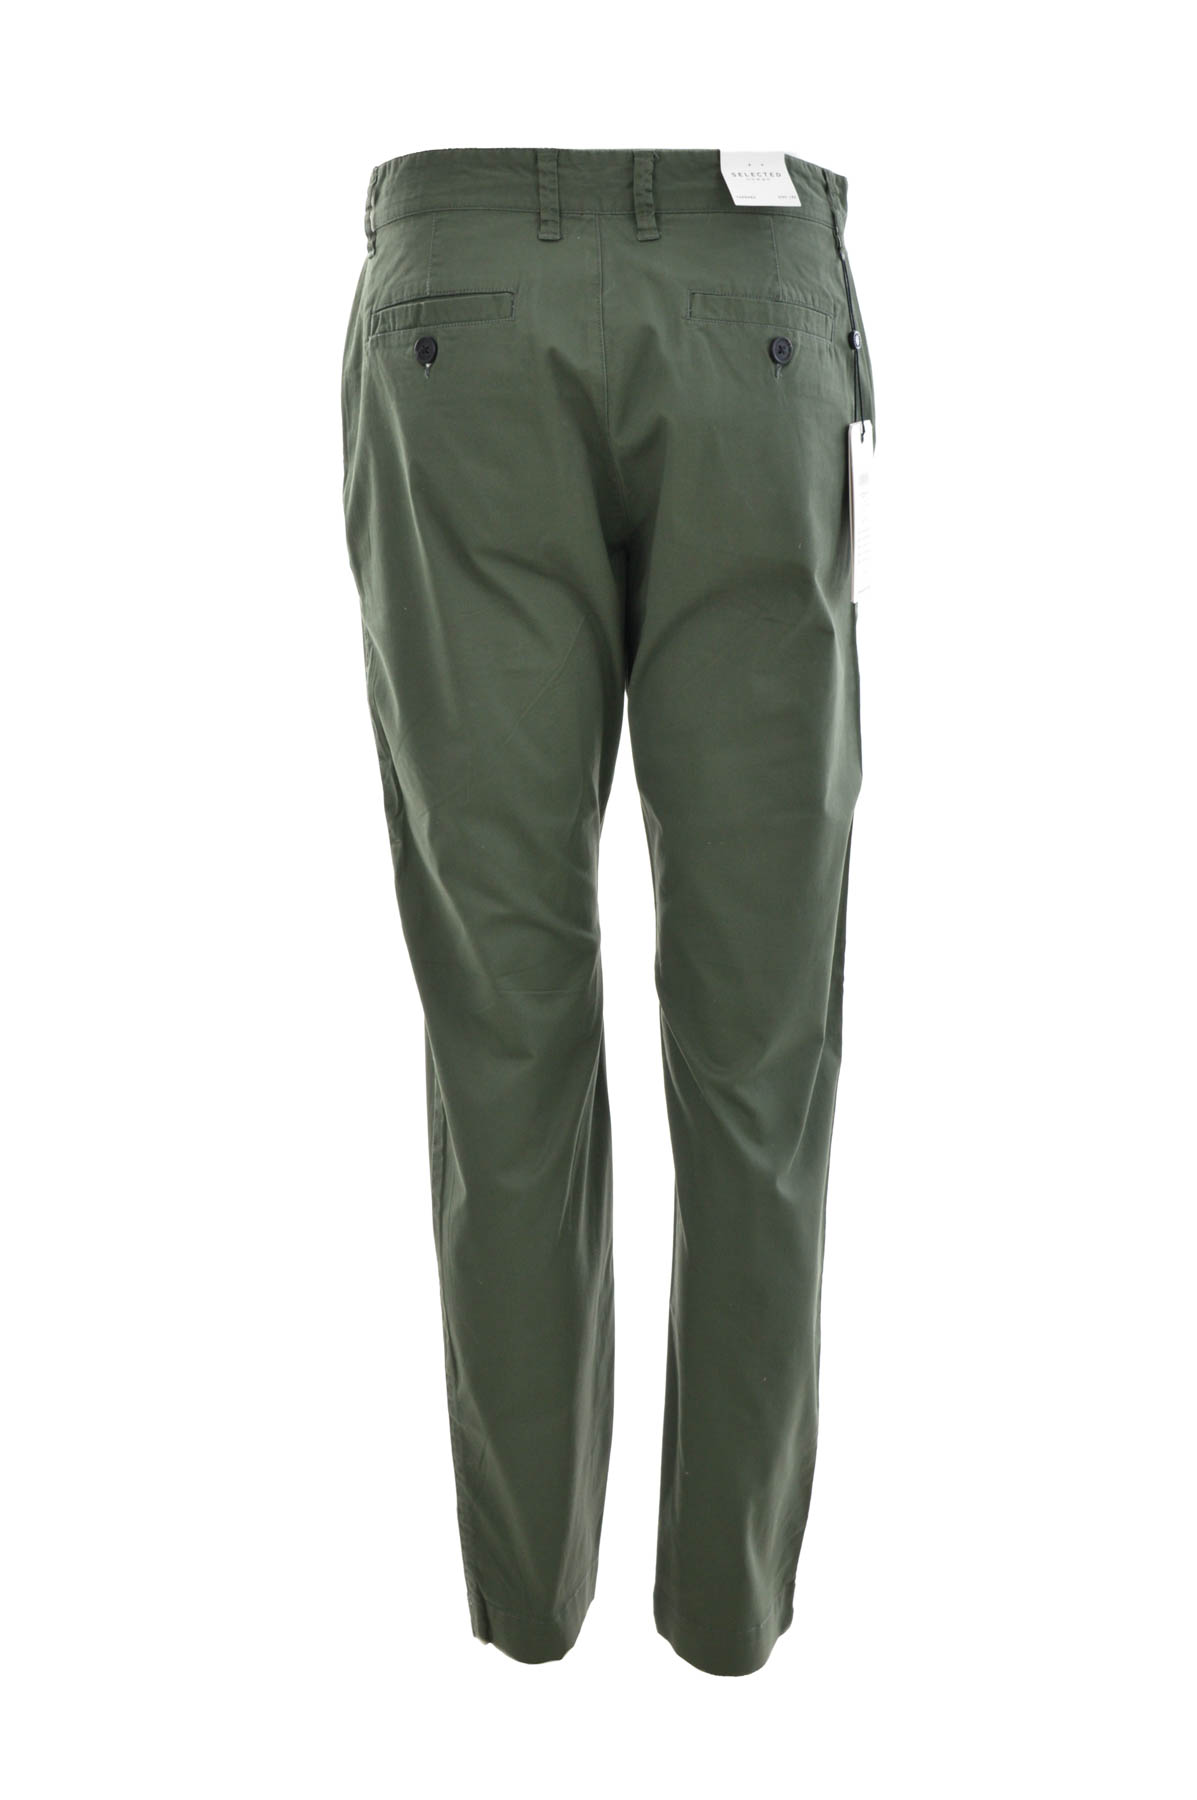 Men's trousers - SELECTED HOMME - 1